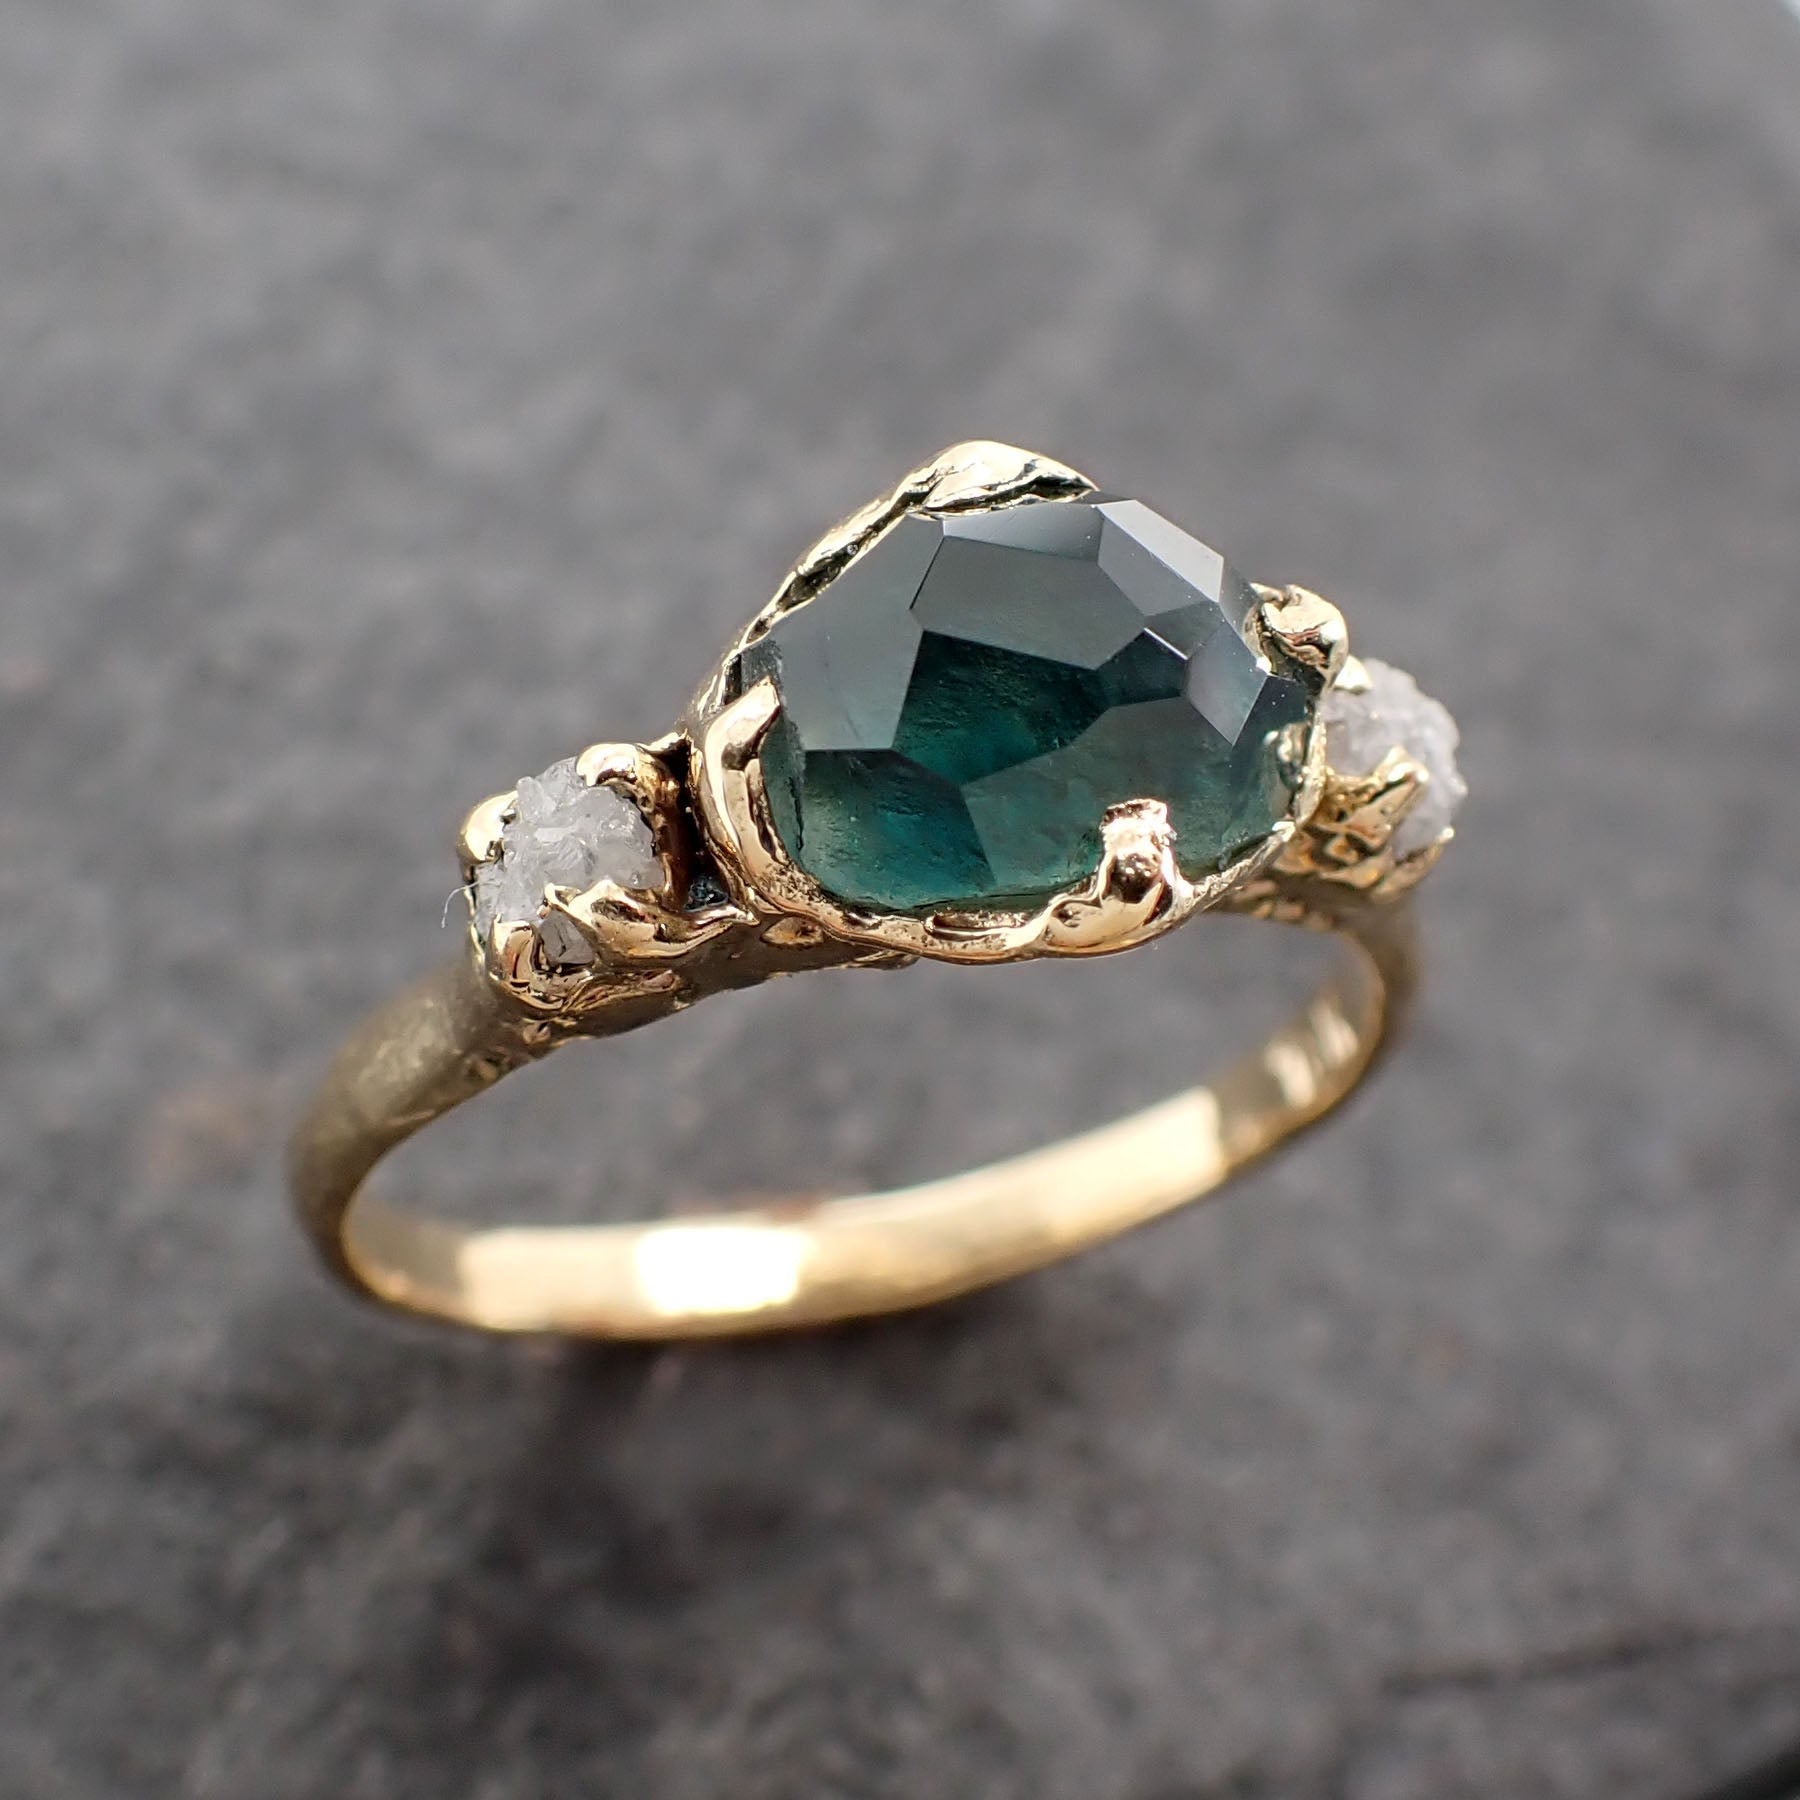 partially faceted montana blue green sapphire rough diamond 18k yellow gold engagement wedding gemstone multi stone ring 2572 Alternative Engagement